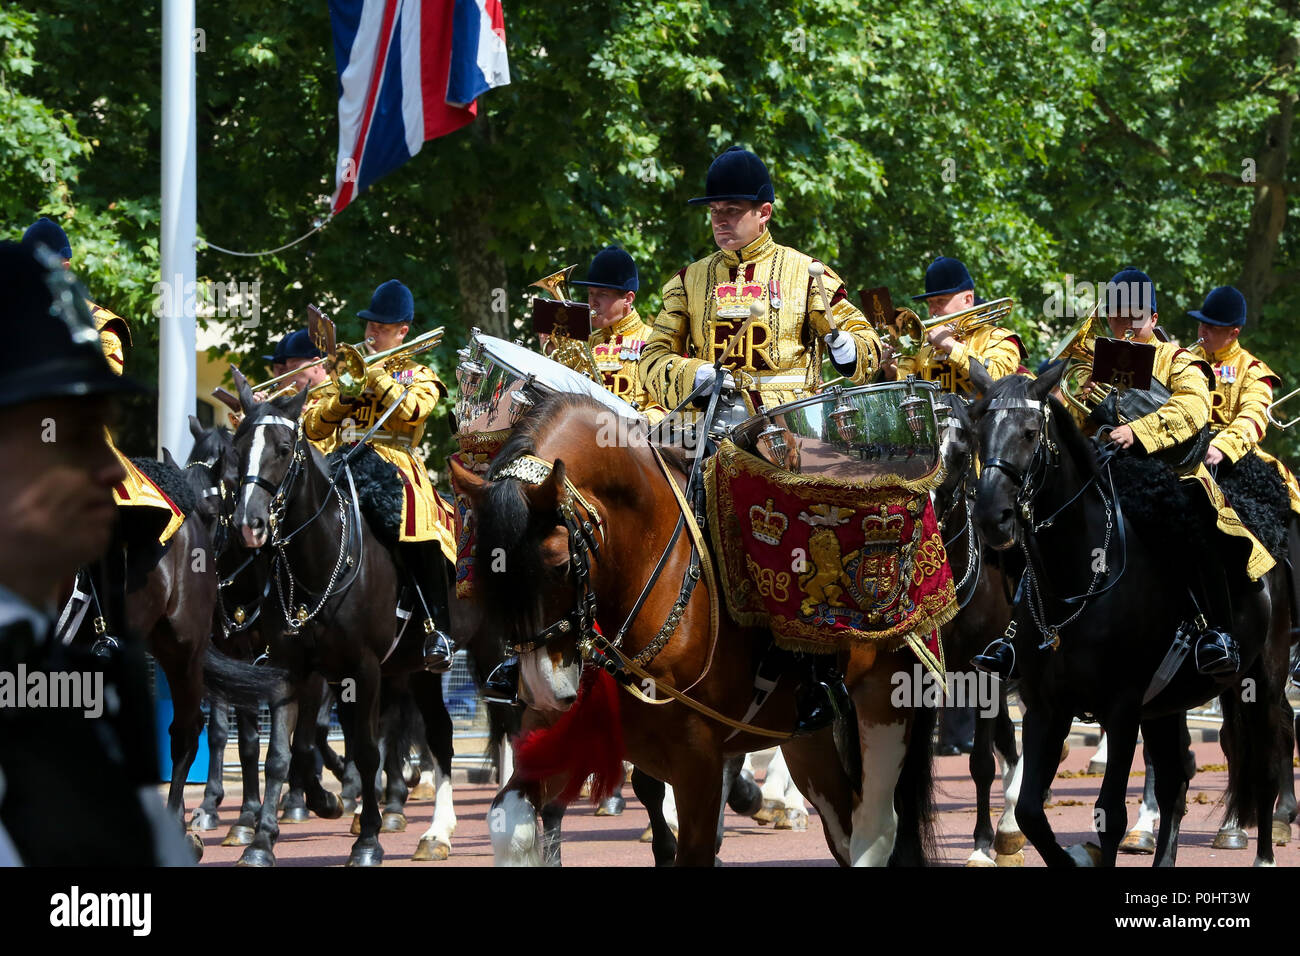 The Mall. London. UK 9 June 2018 - HM The Queen Elizabeth II joined by other members of the Royal Family travel along the Mall in an open top carriage during the Trooping the Colour which marks the 92nd celebration of The Queen's official birthday, during which she inspects troops from the Household Division as they march in Whitehall, before watching a fly-past from the balcony at Buckingham Palace. Credit: Dinendra Haria/Alamy Live News Stock Photo